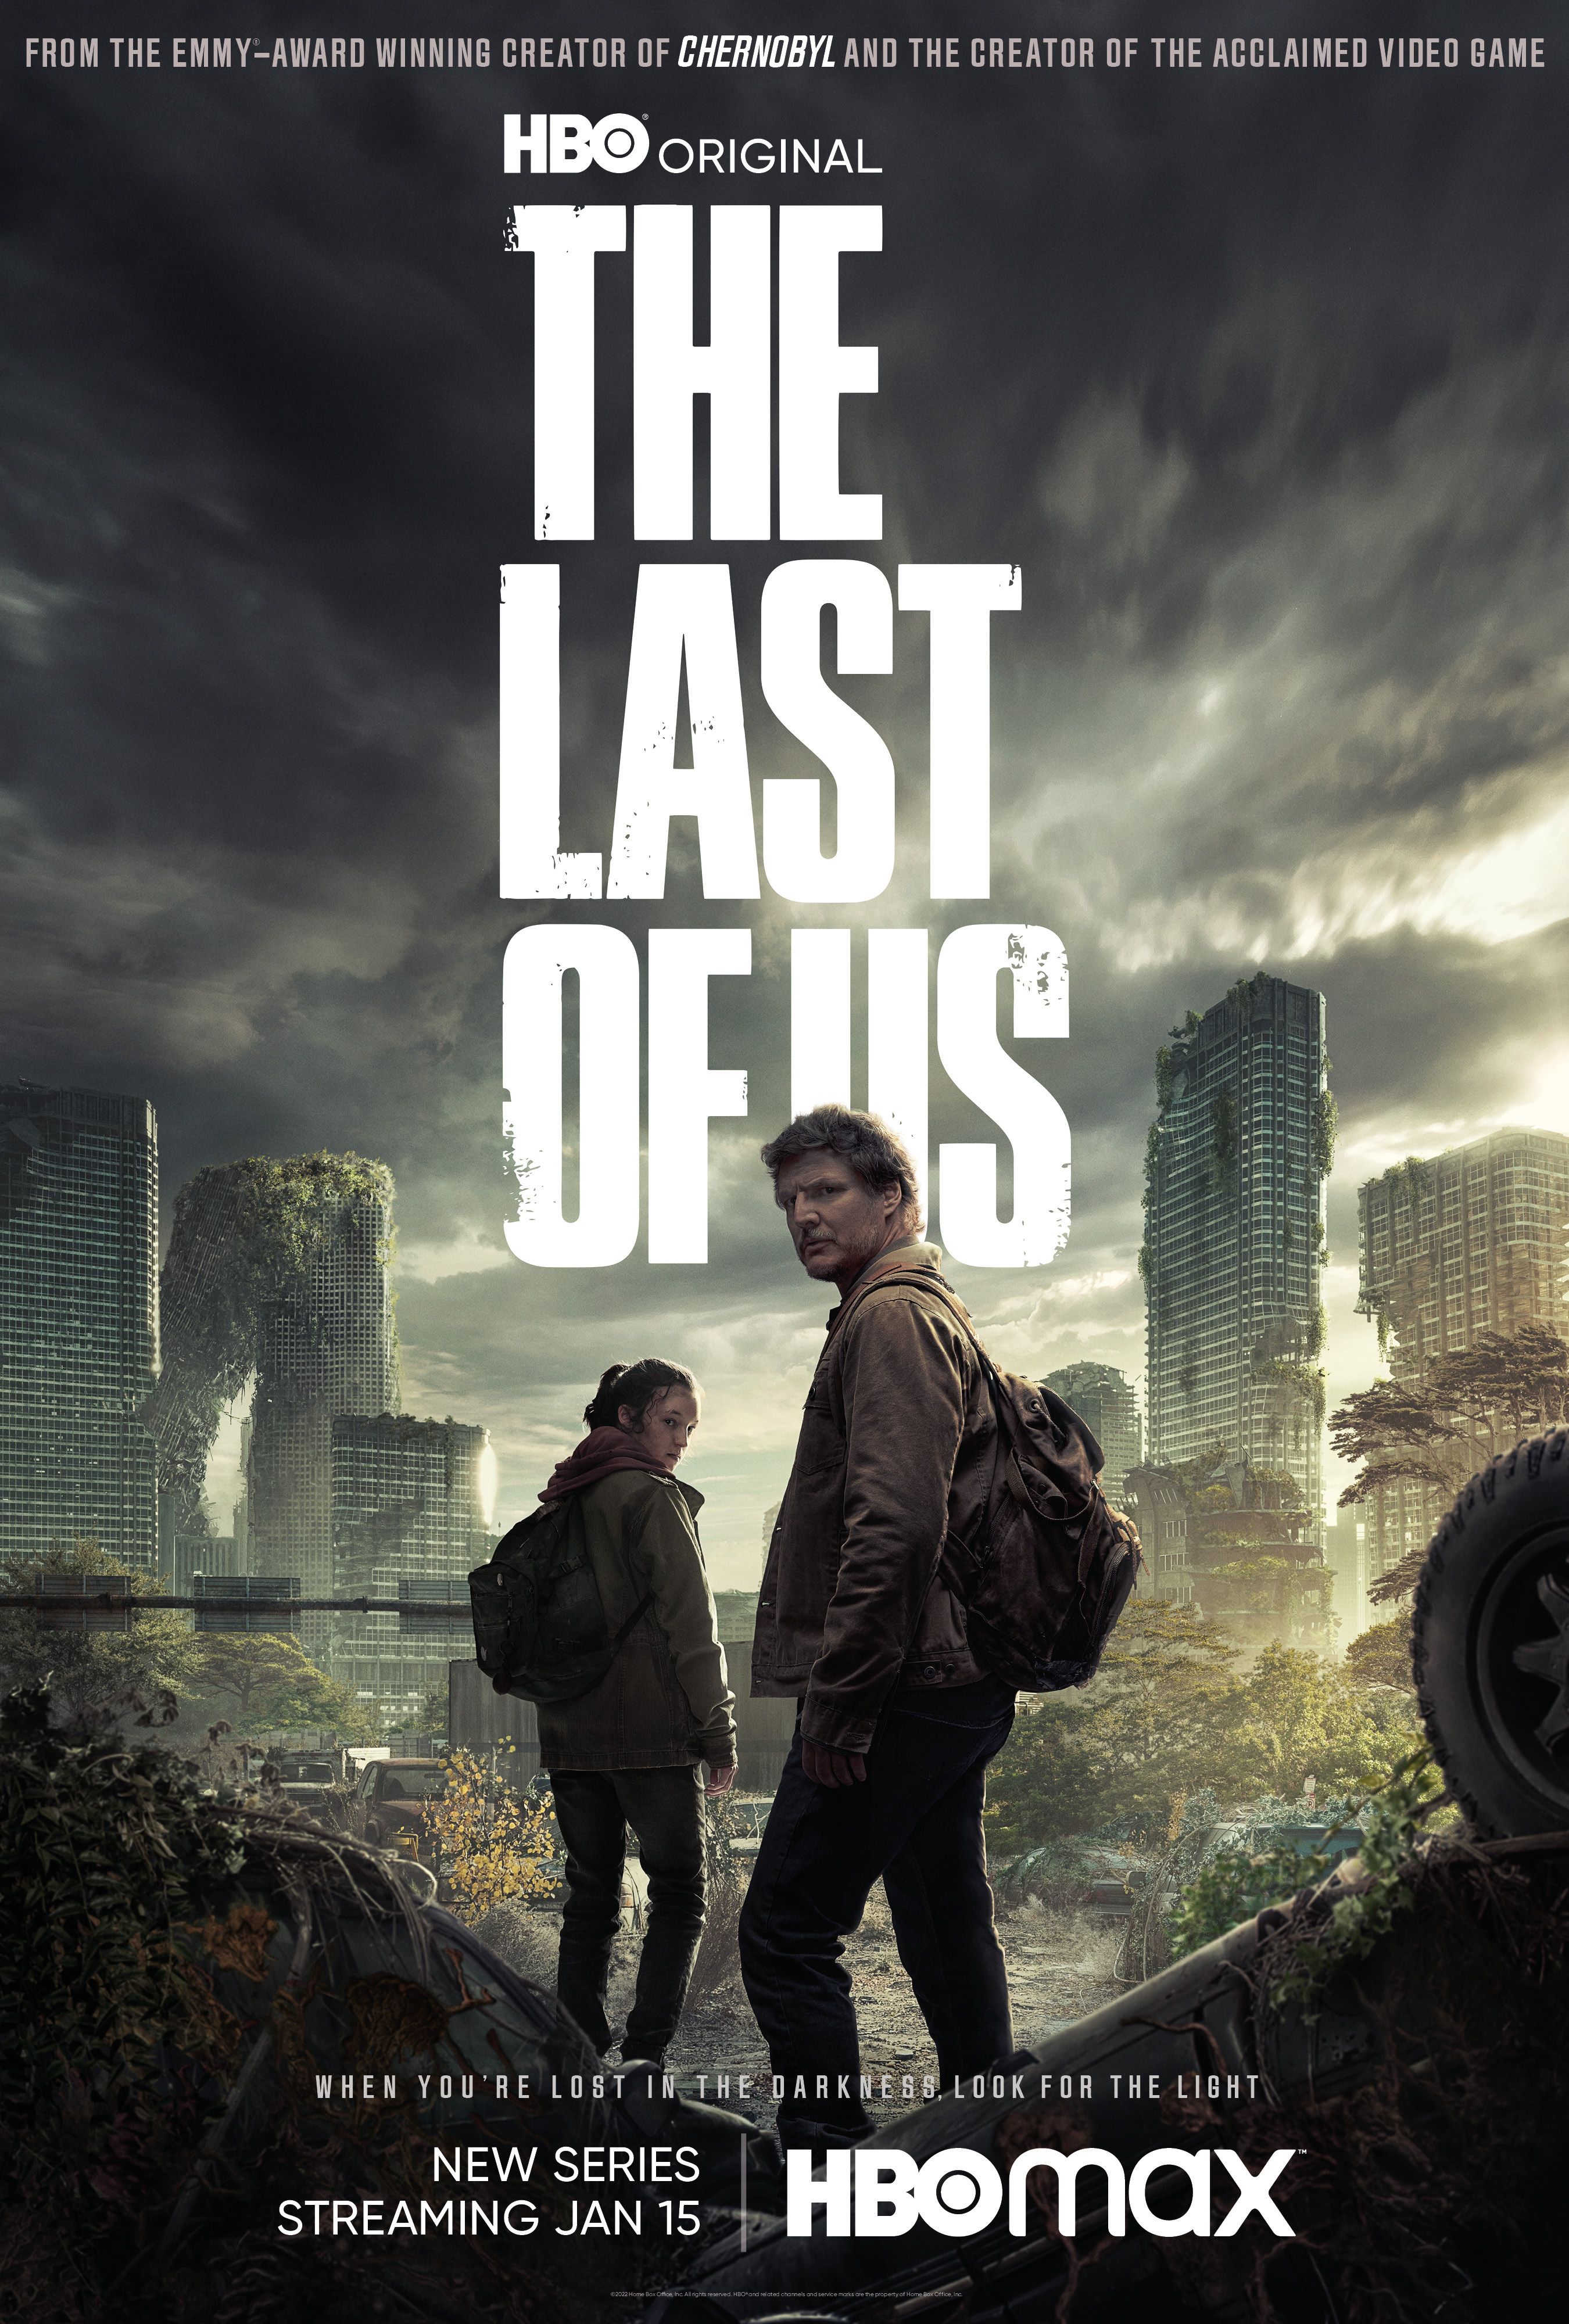 Pedro Pascal and Bella Ramsey in The last of us poster